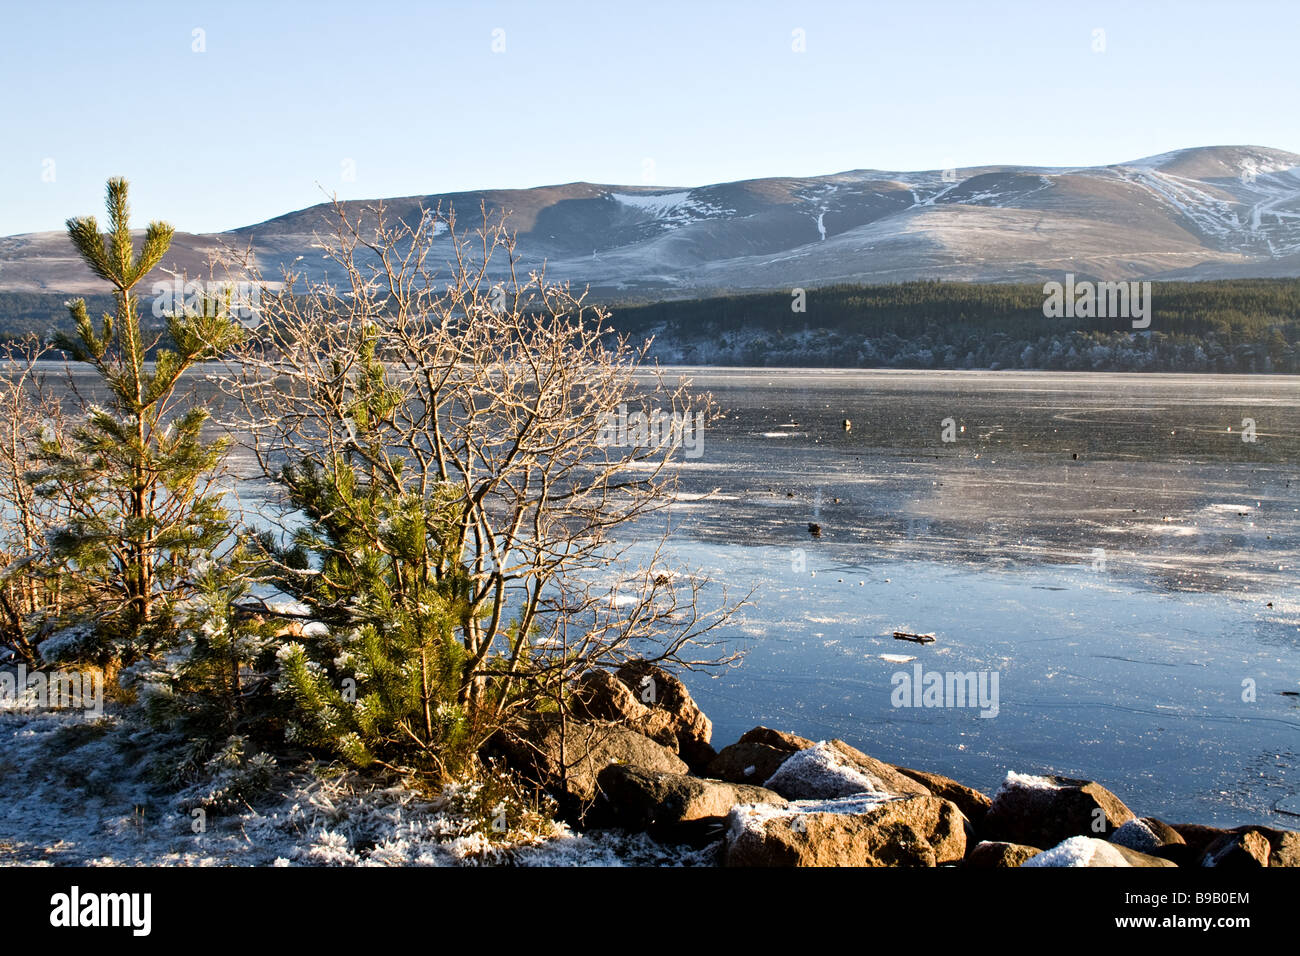 Ice on Loch Morlich near the Cairngorm mountains in the highlands of Scotland with snowy moutains in the background Stock Photo